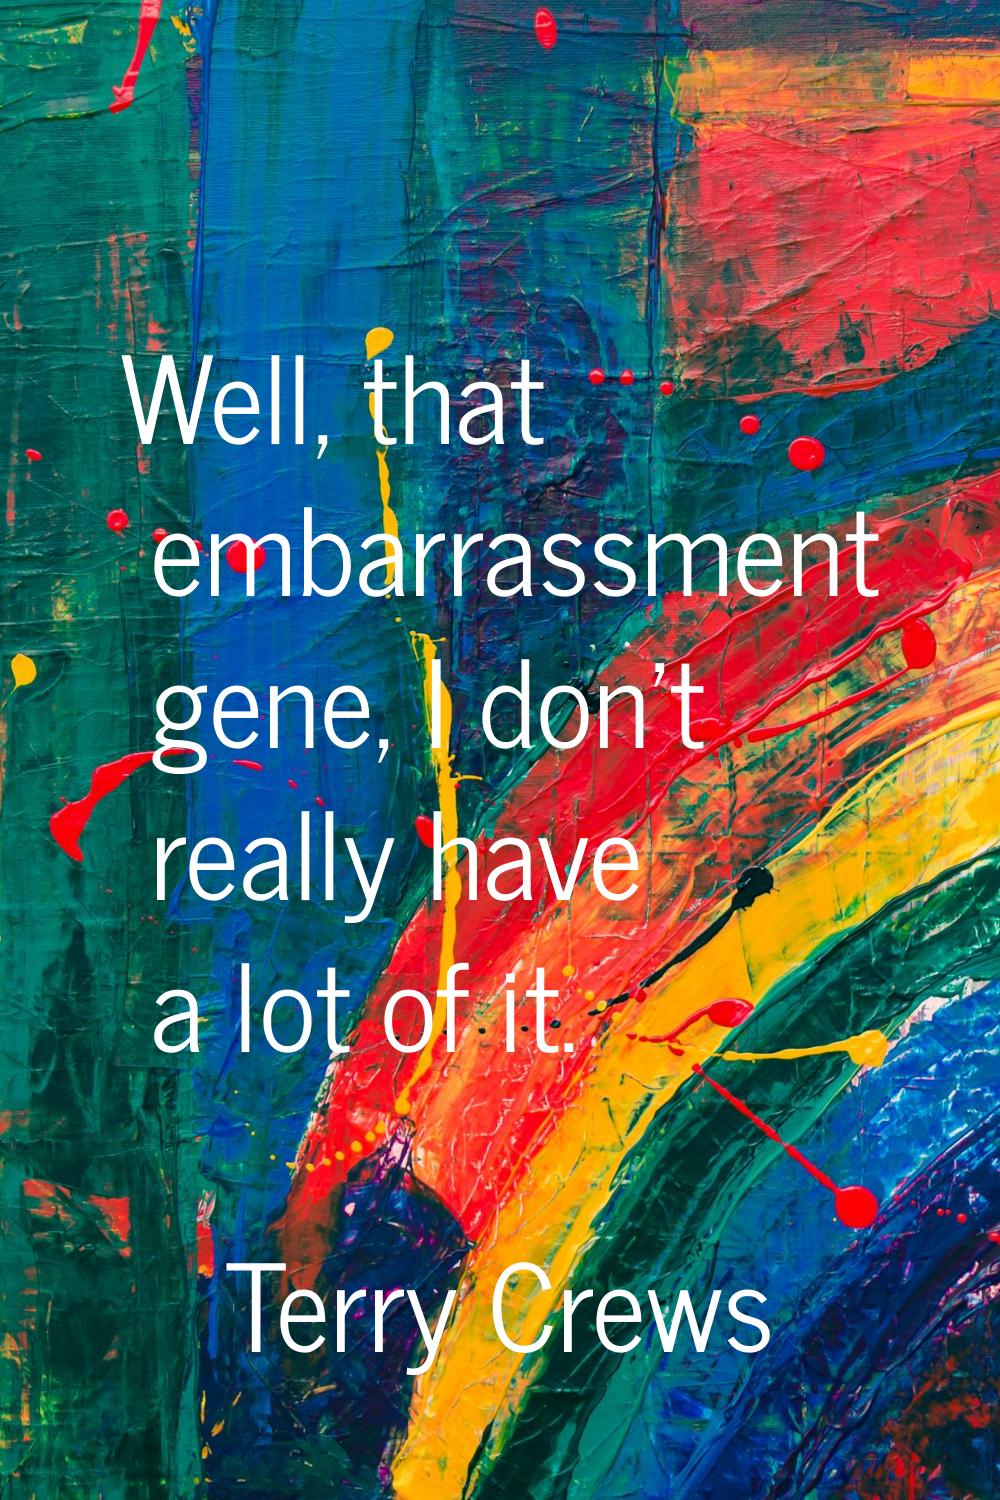 Well, that embarrassment gene, I don't really have a lot of it.